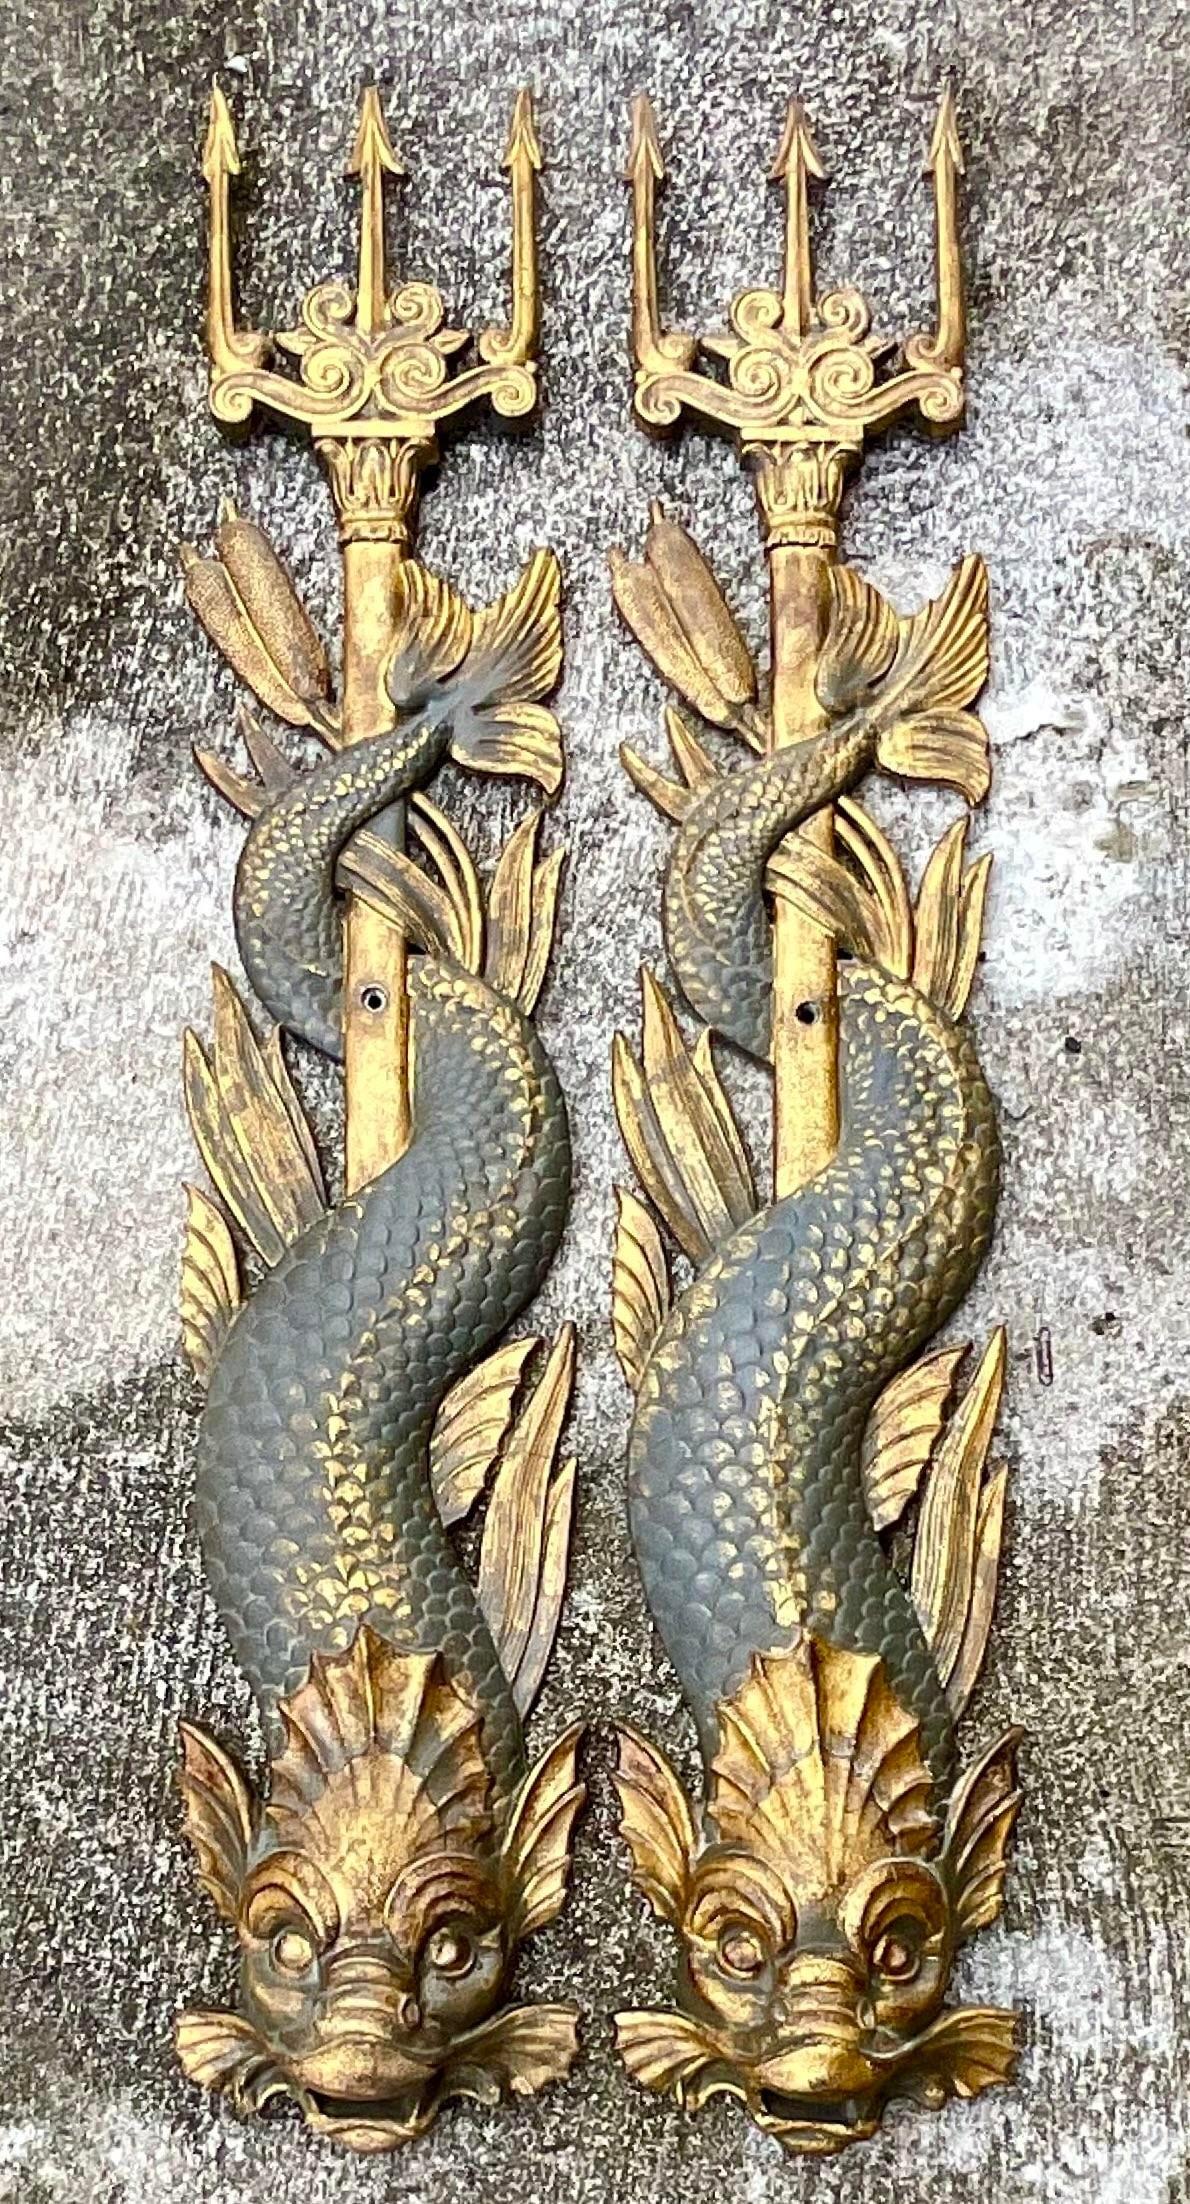 A stunning pair of vintage Boho wall spouts. Cast metal with a hand painted gilt finish. A chic pair of serpent fish wrapped around a trident. Incredible attention to detail. Acquired from a Palm Beach estate.